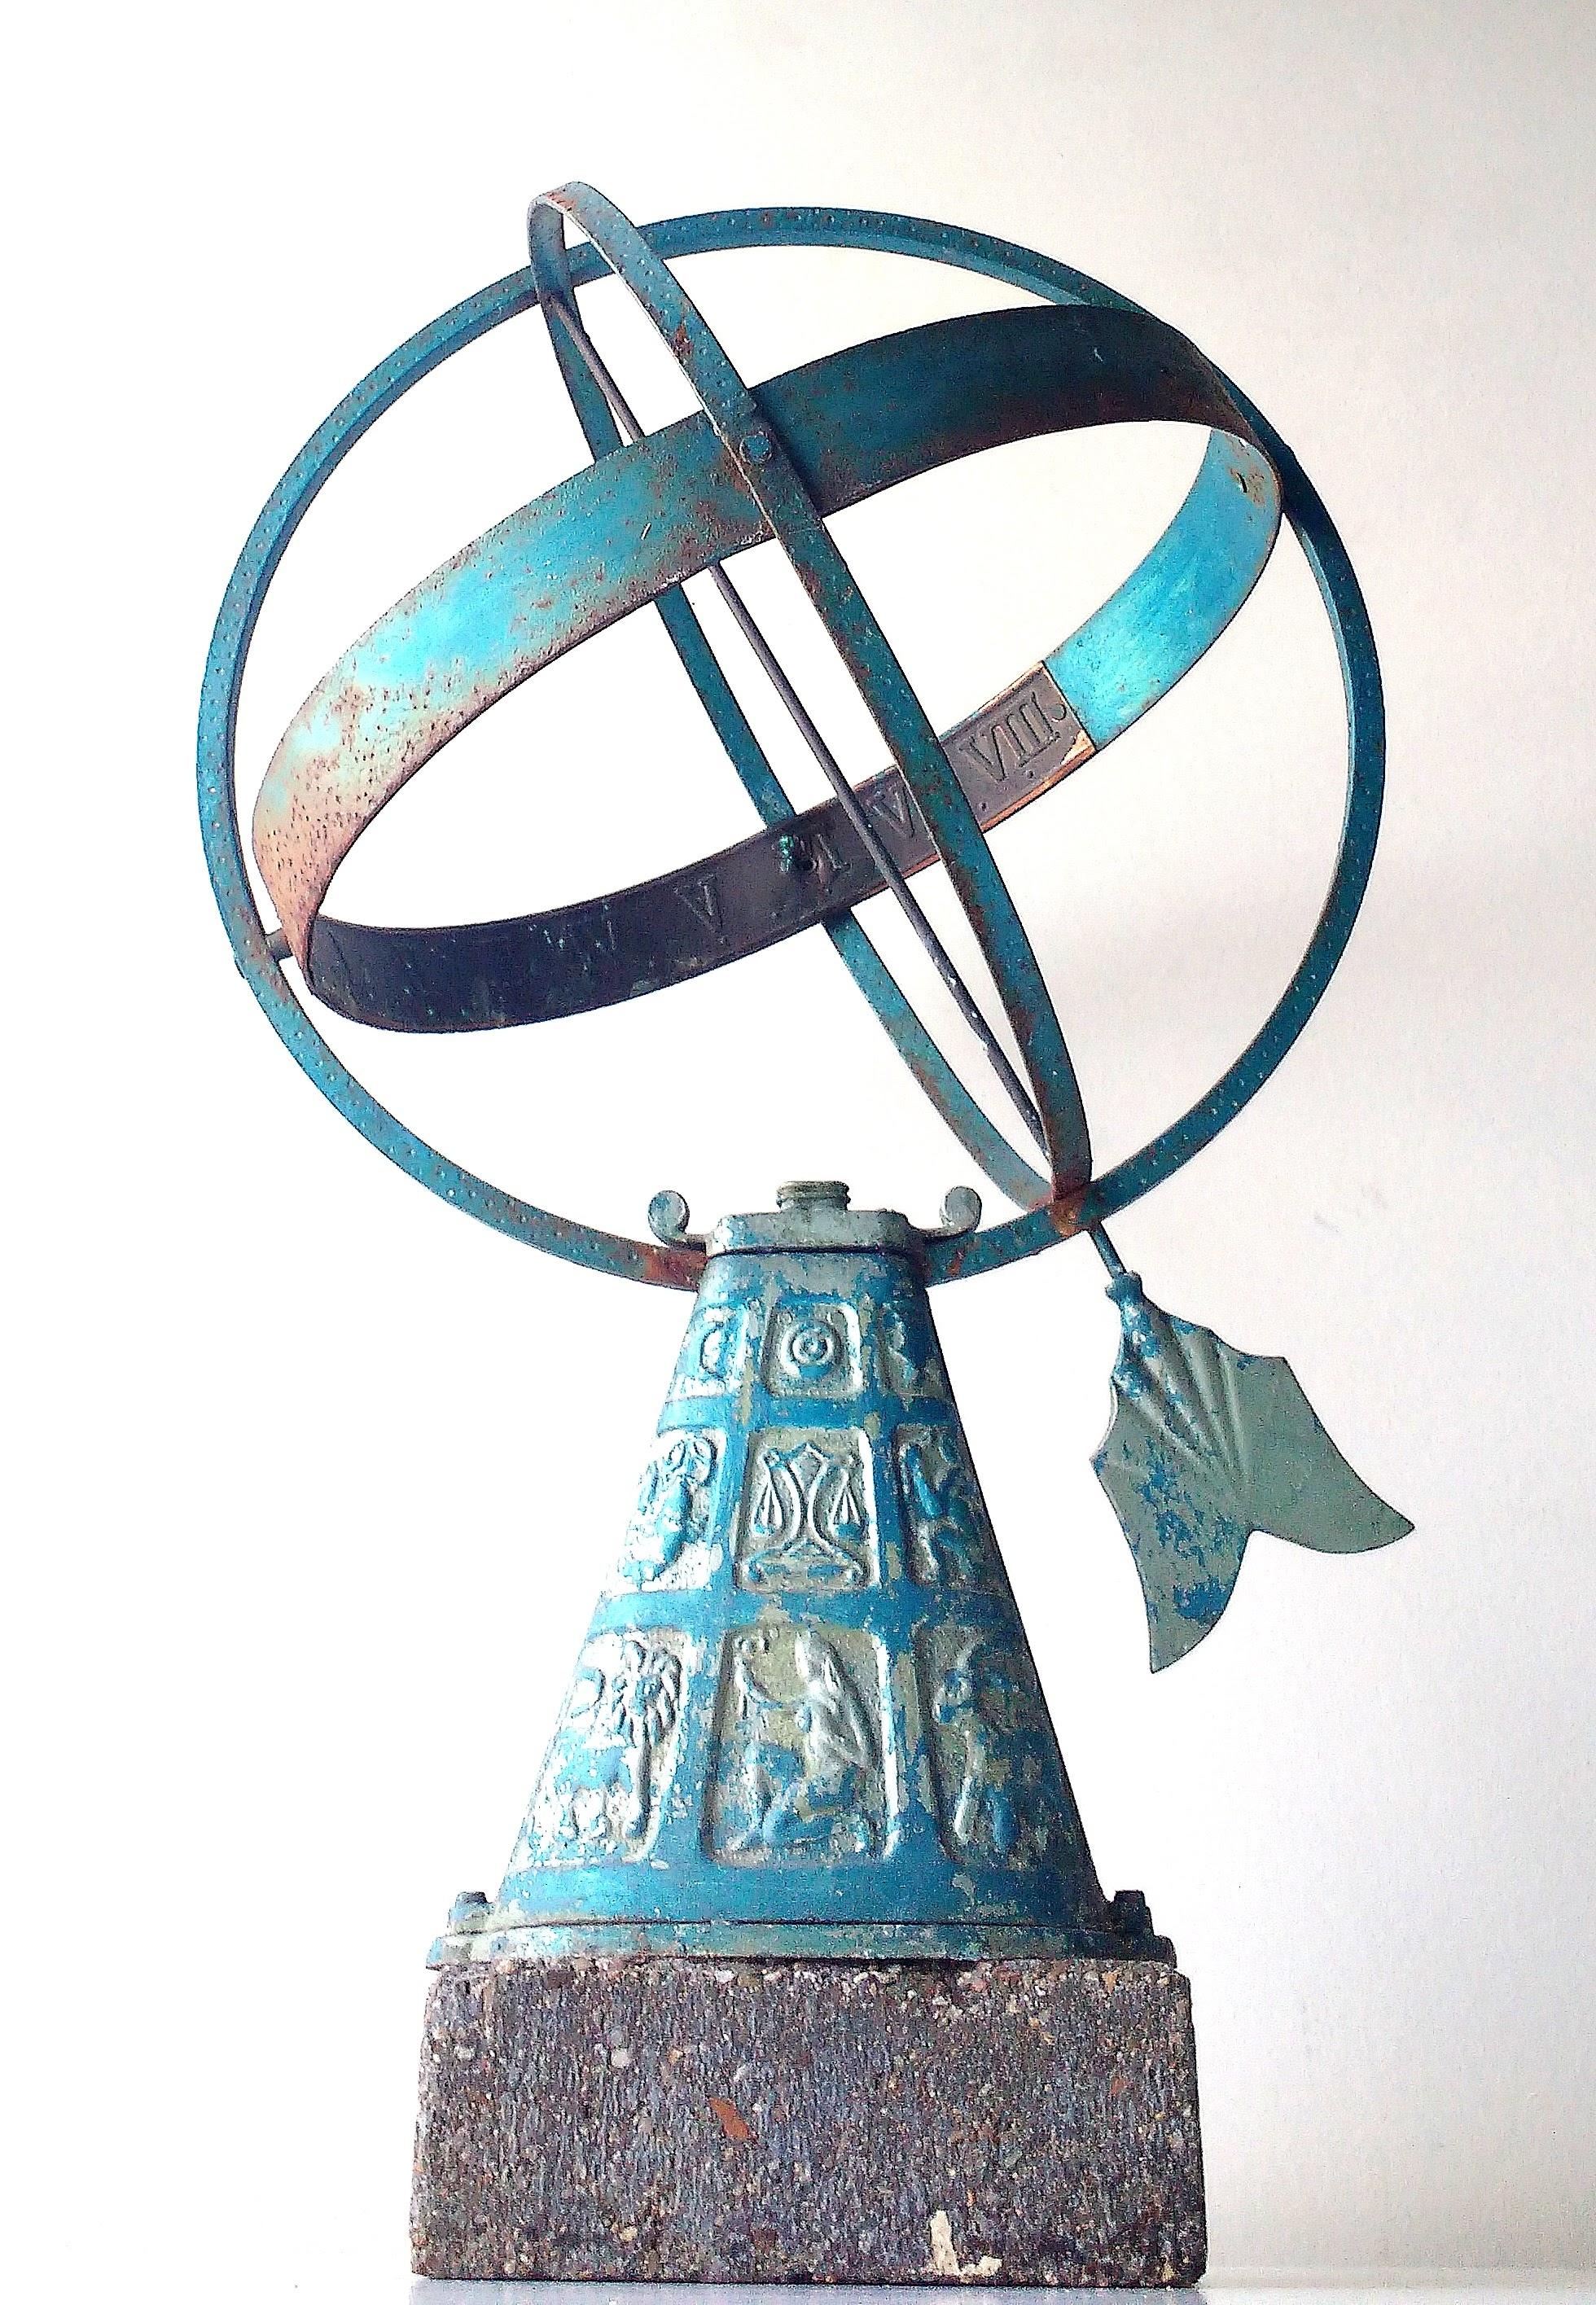 Antique sundial zodiac base cast metal and copper armillary on stone base


This magnificent sundial was made in Finland in the 1940s.

The numbers are inlayed in copper
The zodiac signs are beautifully cut out

Dimensions are 31' H x 17 .5'